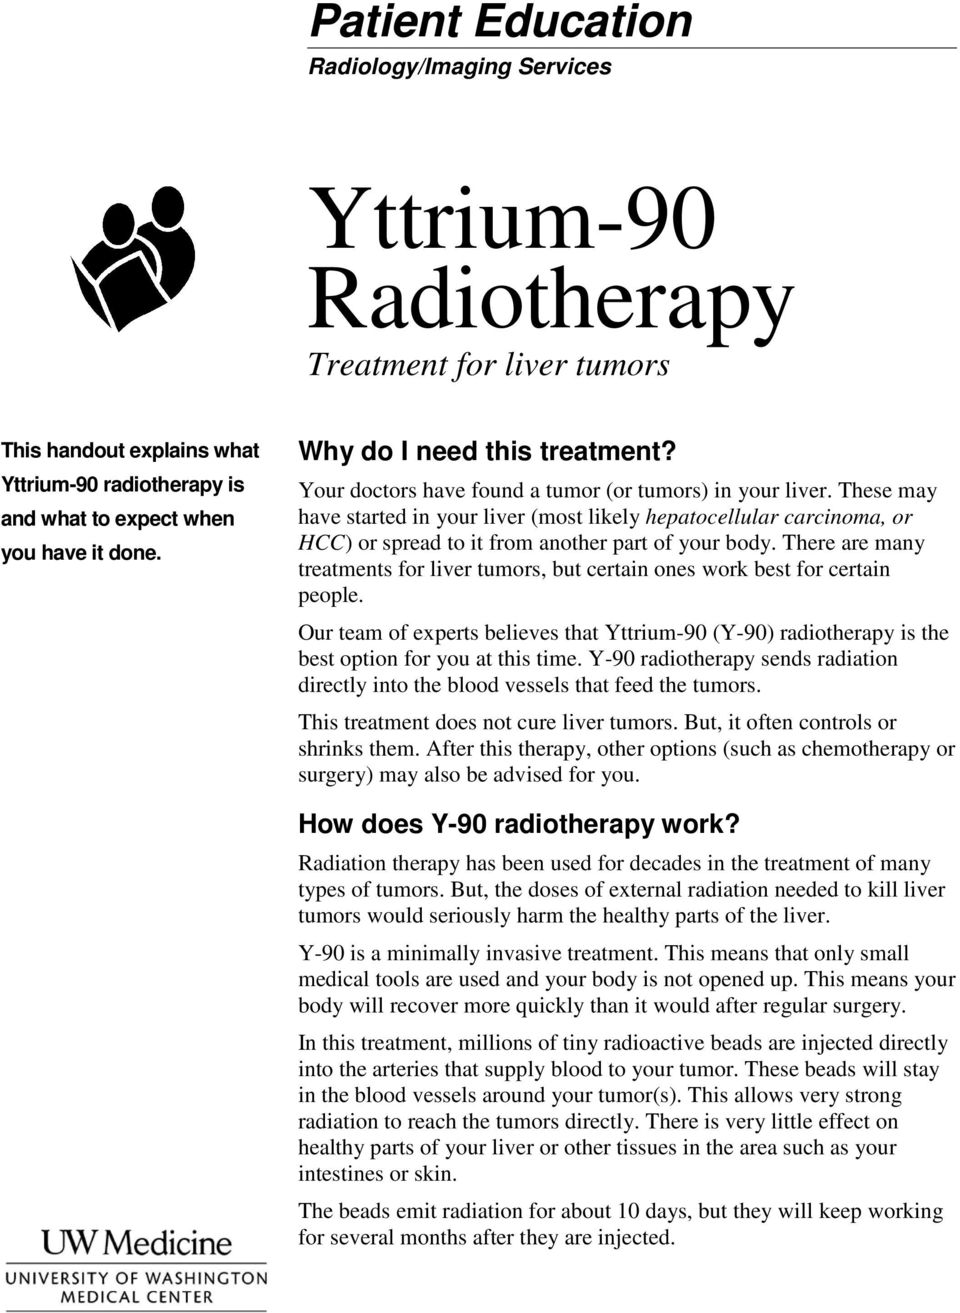 There are many treatments for liver tumors, but certain ones work best for certain people. Our team of experts believes that Yttrium-90 (Y-90) radiotherapy is the best option for you at this time.